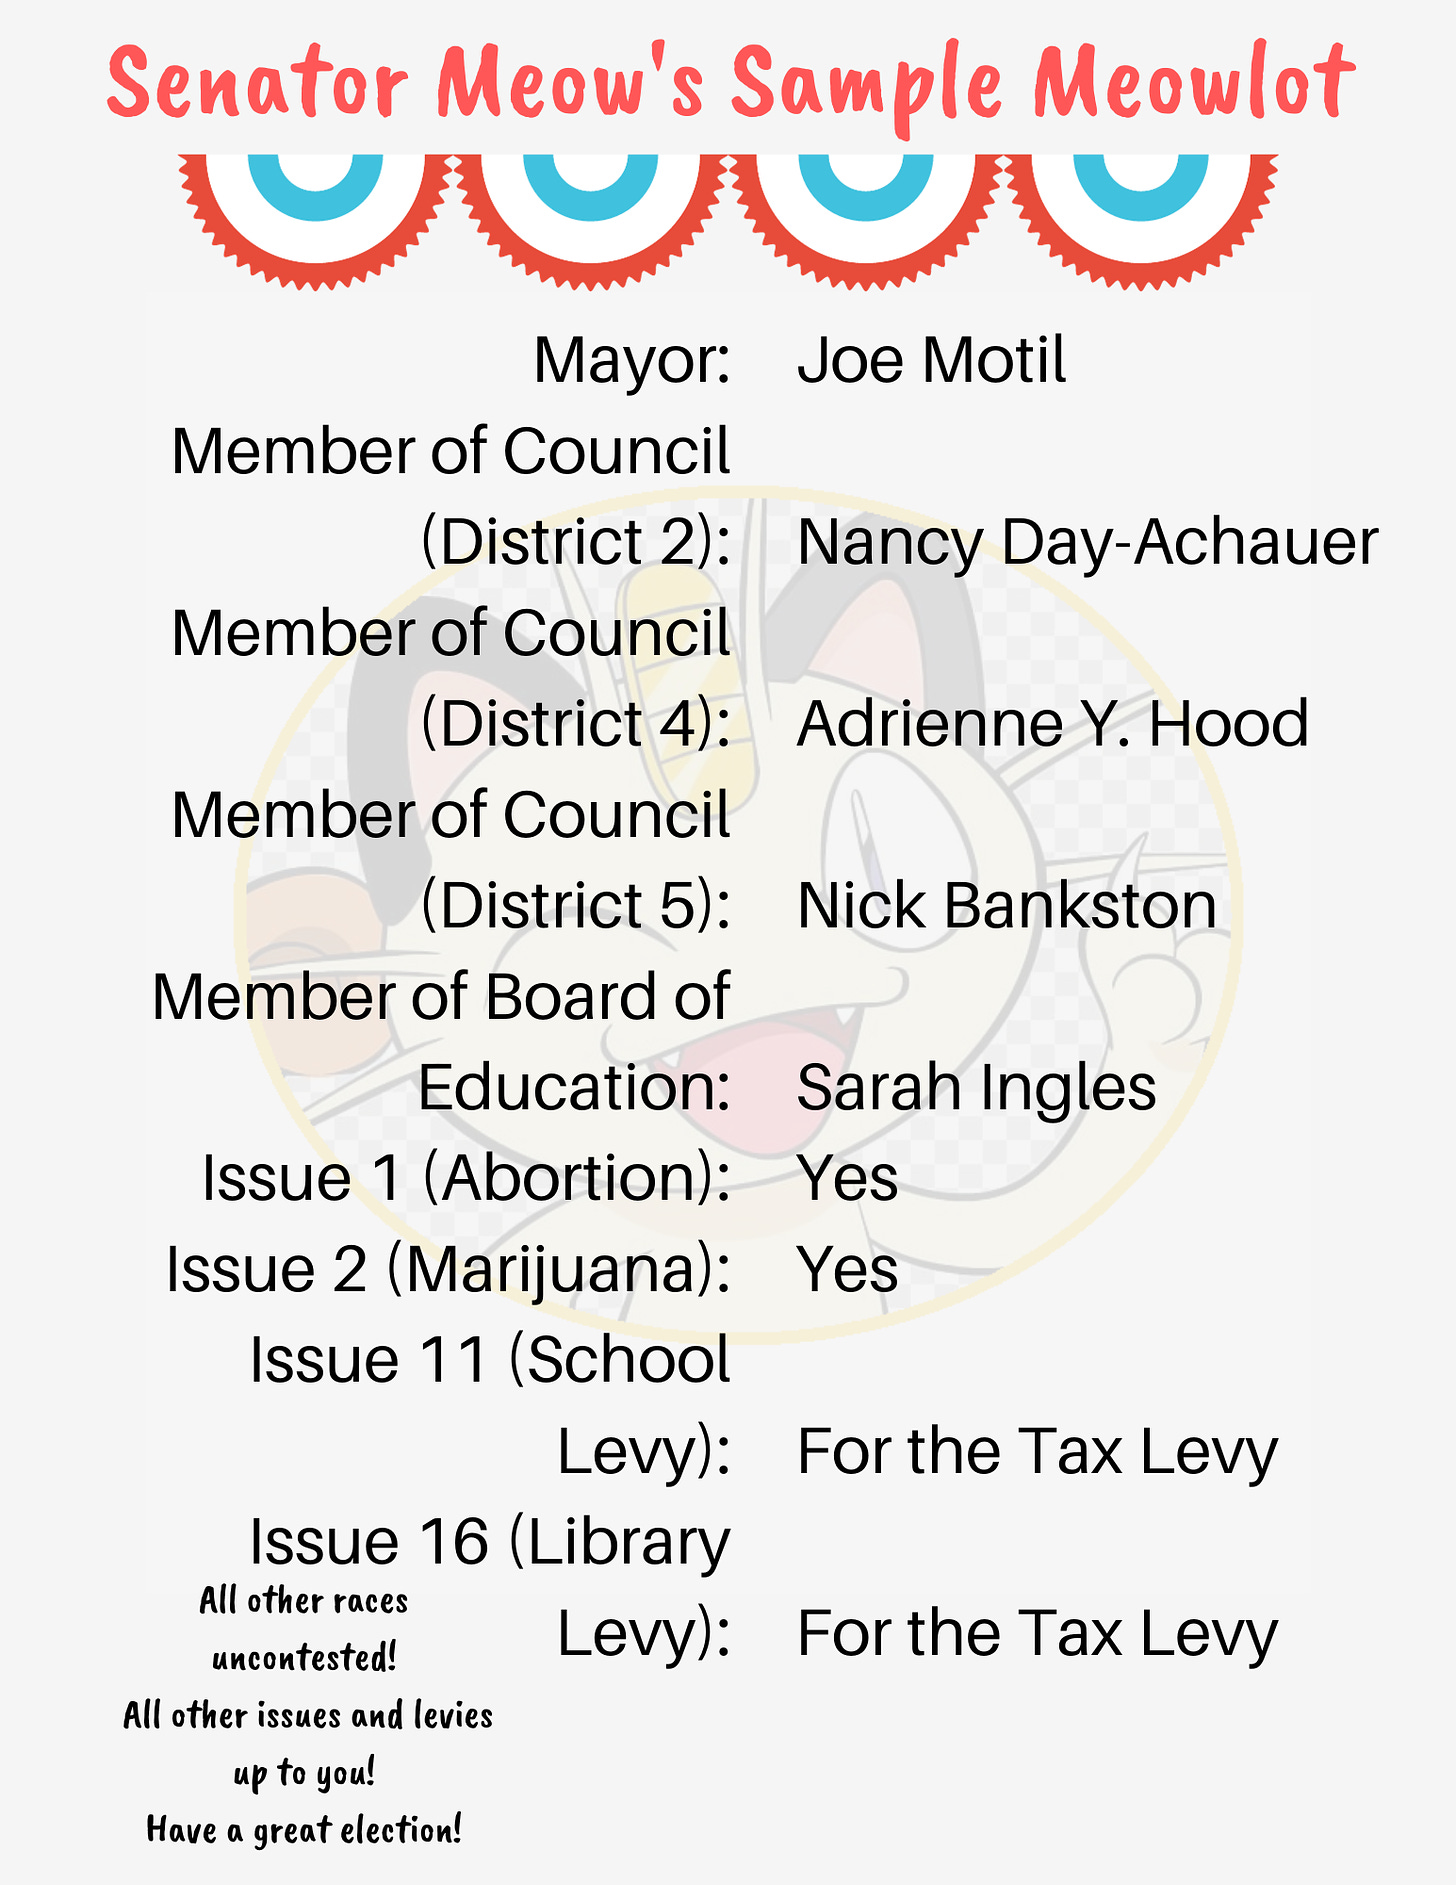 Senator Meow's Sample Meowlot. Mayor: Joe Motil. Member of Council (District 2): Nancy Day-Achauer. Member of Council (District 4): Adrienne Hood. Member of Council (District 5): Nick Bankston. Member of Board of Education: Sarah Ingles. Issue 1 (Abortion): Yes. Issue 2 (Marijuana): Yes. Issue 11 (School Levy): For the Tax Levy. Issue 16 (Library Levy): For the Tax Levy.